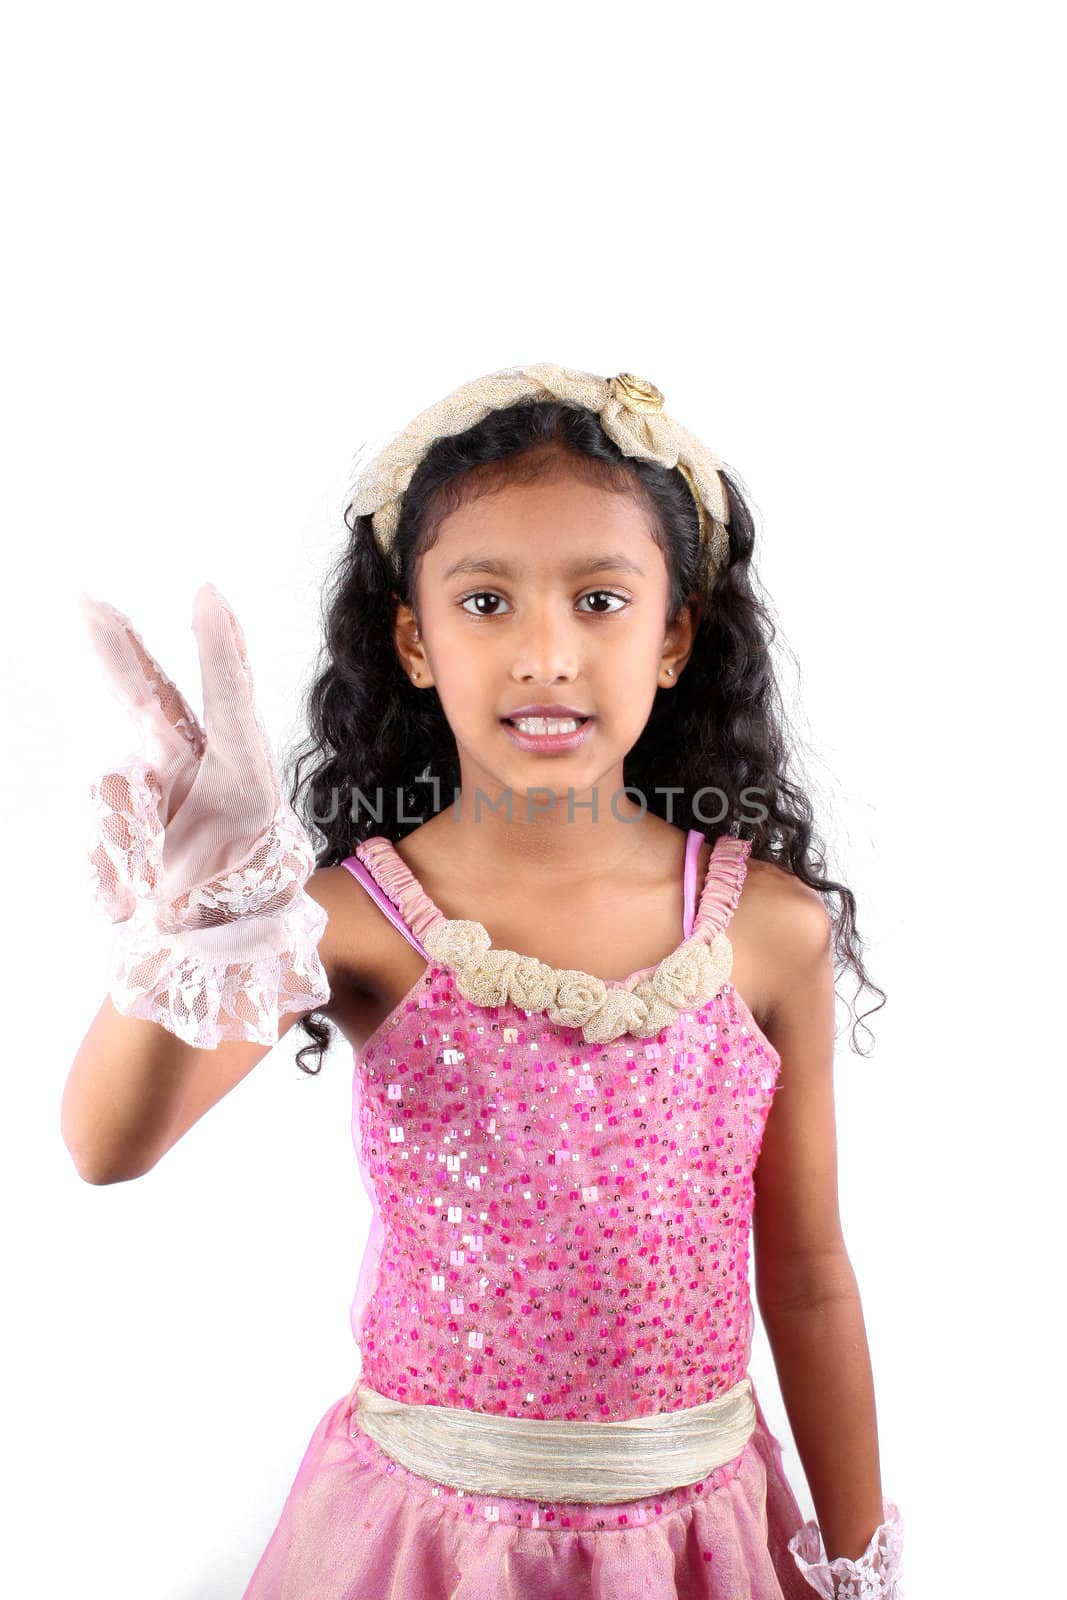 A little Indian girl wearing a white glove wishing victory, on white studio background.